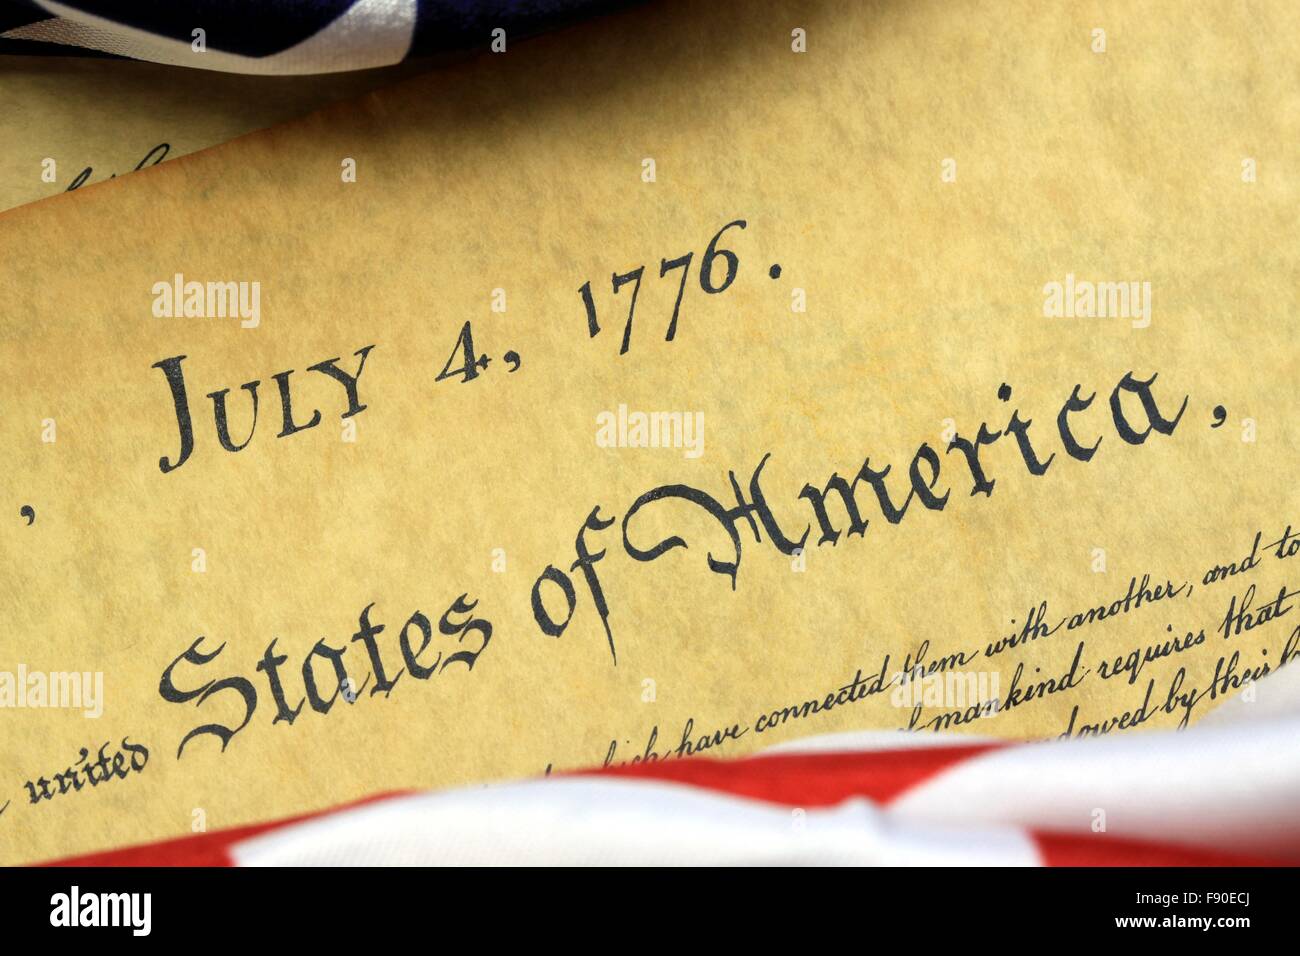 Historical Document US Constitution - We The People Stock Photo